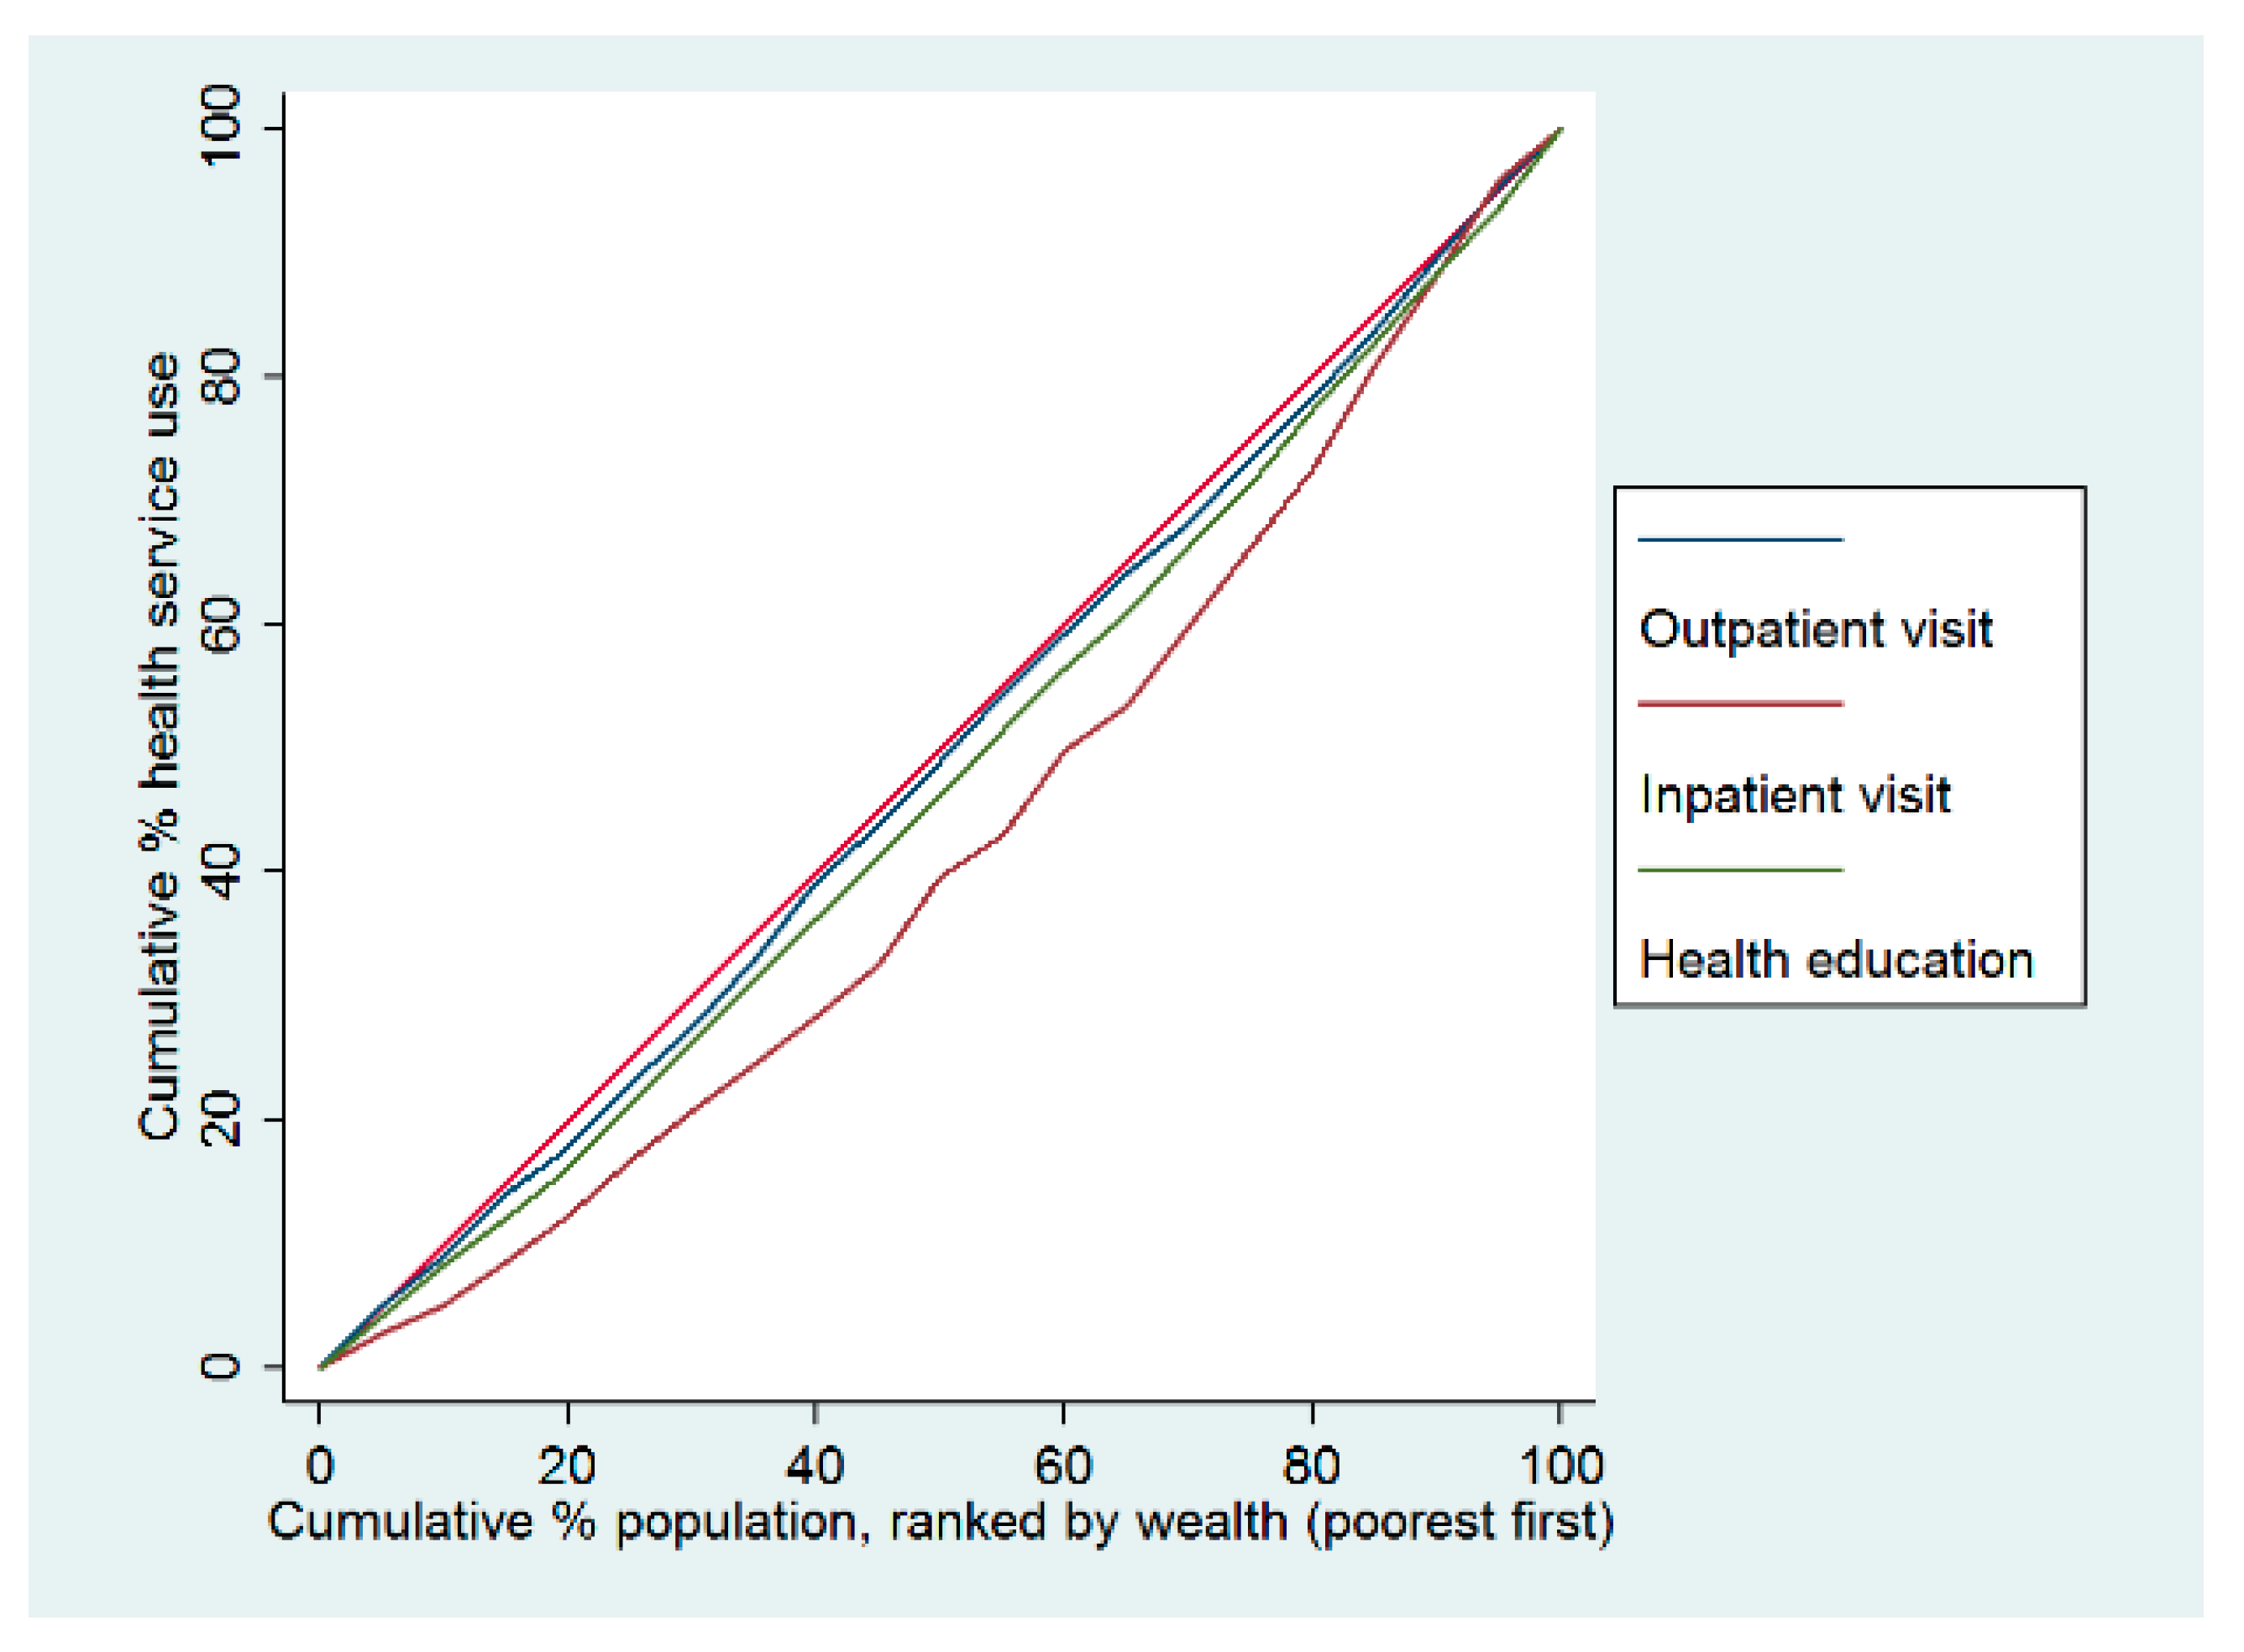 Ijerph Free Full Text Trends And Inequalities In The Health Care And Hypertension Outcomes In China 11 To 15